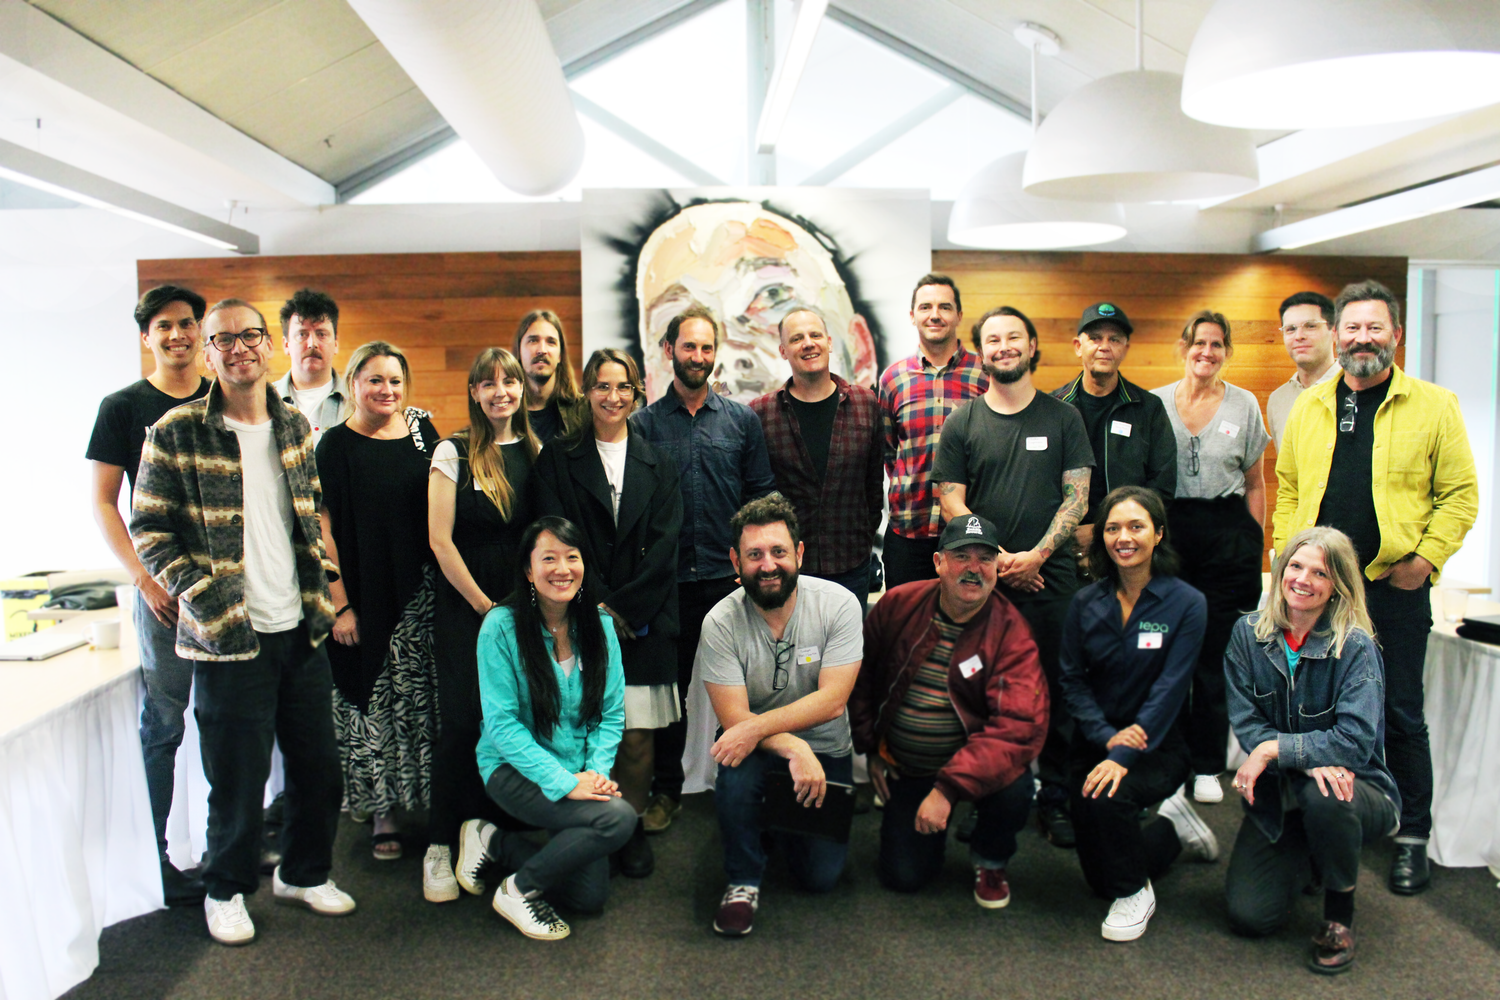 Suitcase Records joins with Green Music Australia for Industry Music Product Stewardship Alliance